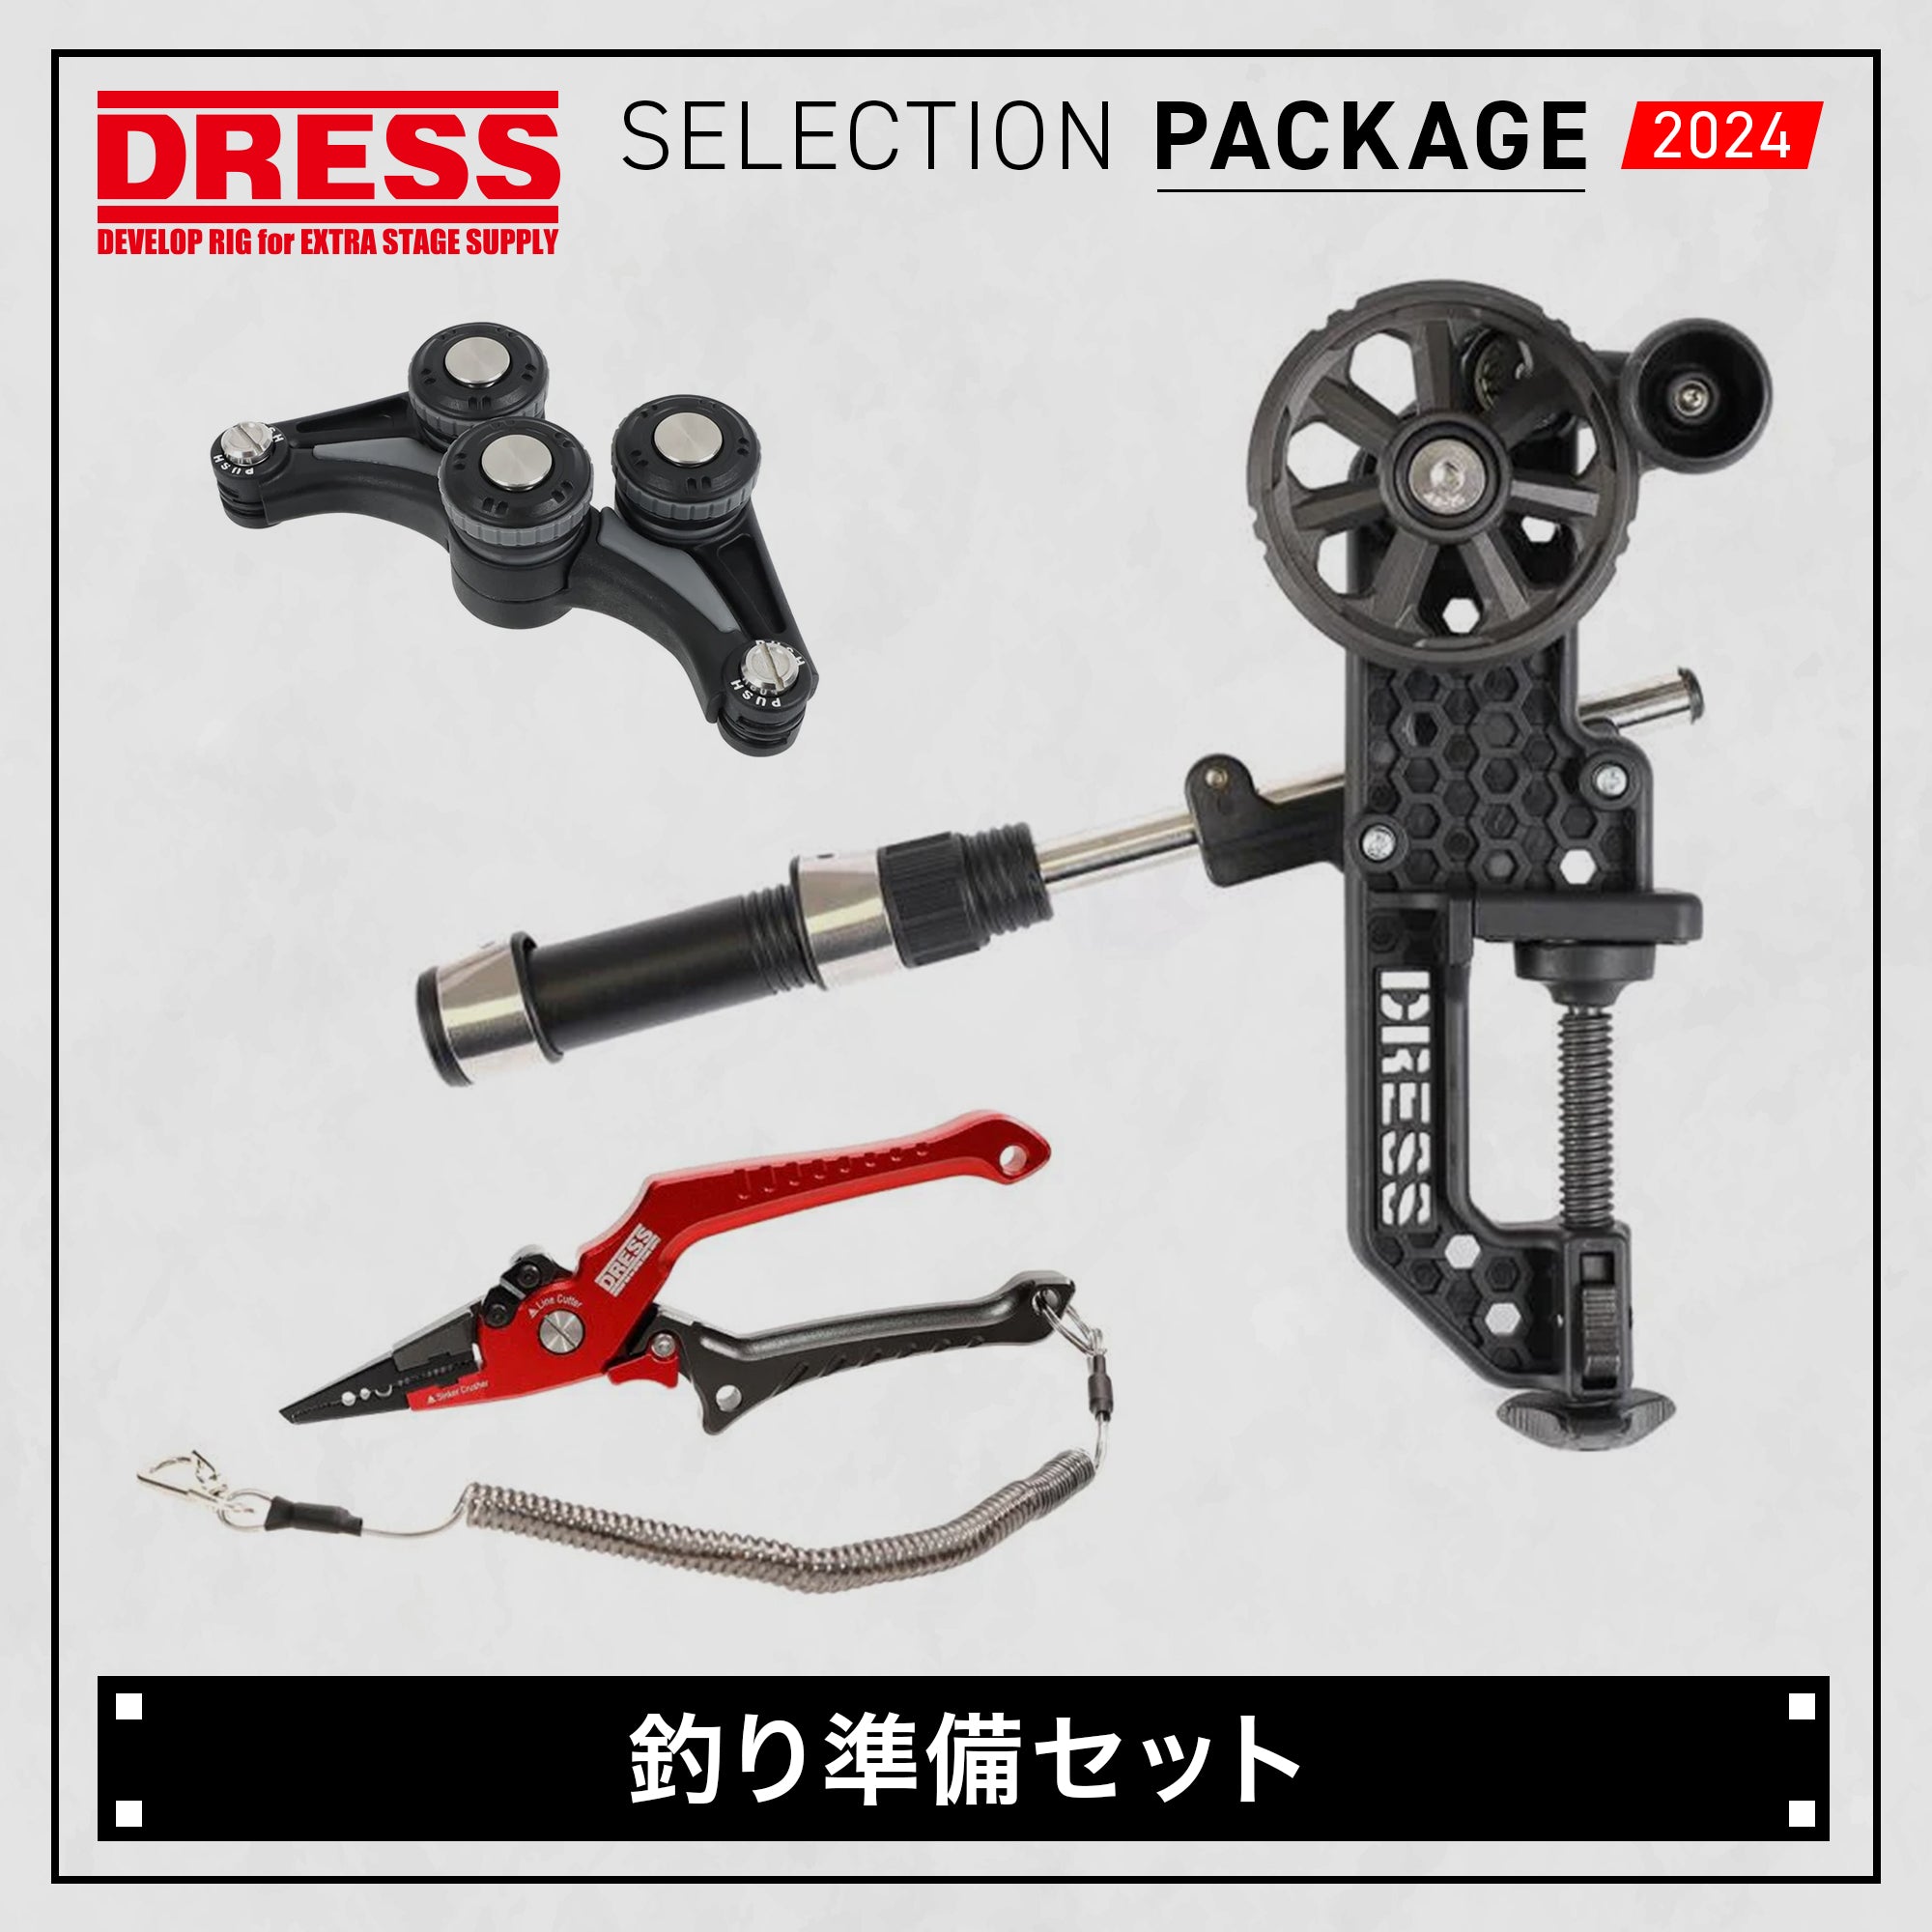 【SELECTION PACKAGE 2024】釣り準備セット